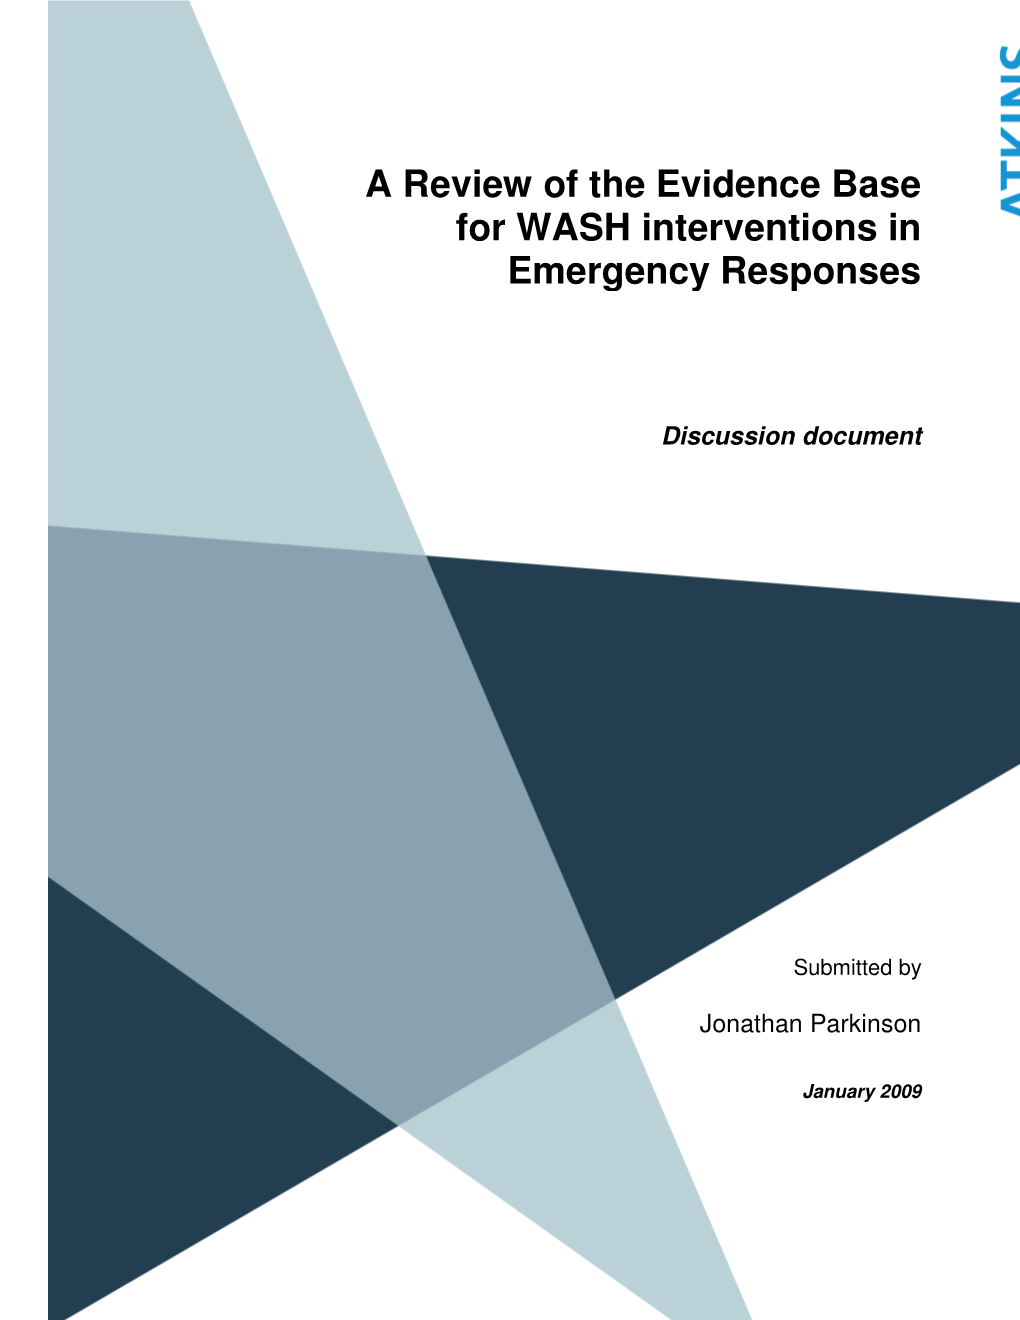 A Review of the Evidence Base for WASH Interventions in Emergency Responses / Relief Operations